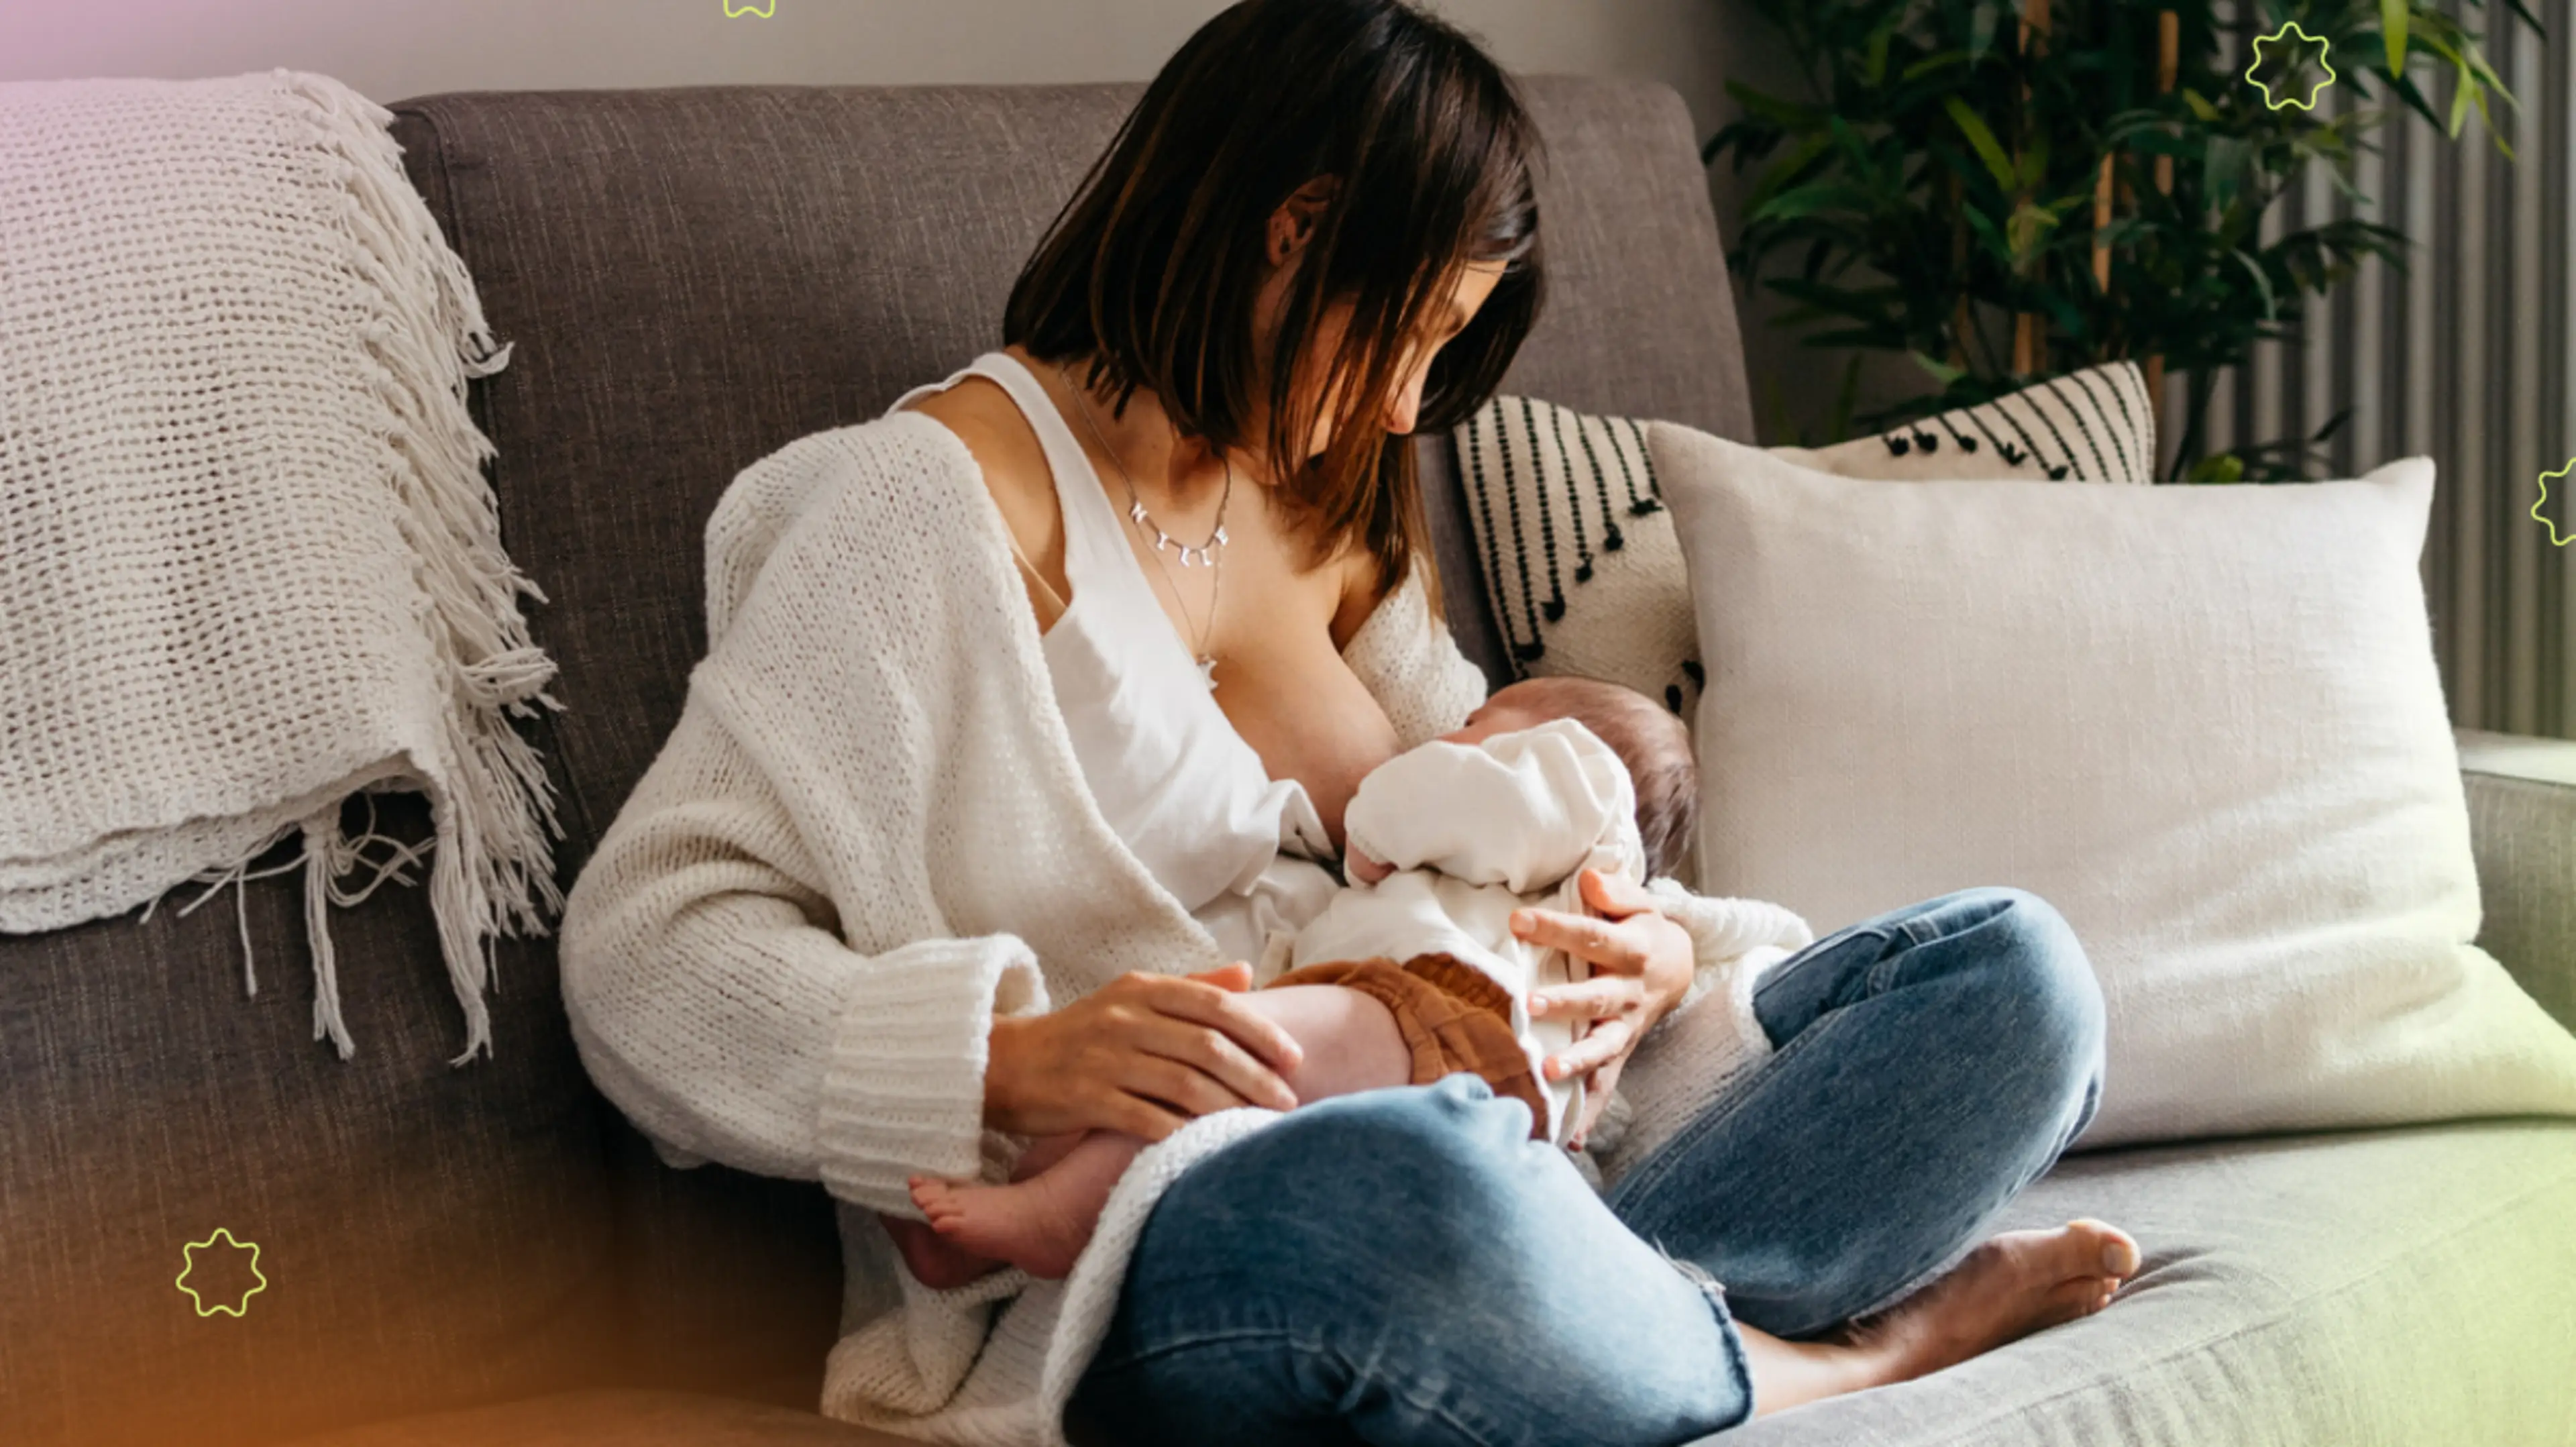 Image for article From Shopping to Binge Watching, New Moms Share Their Feeding Time Rituals